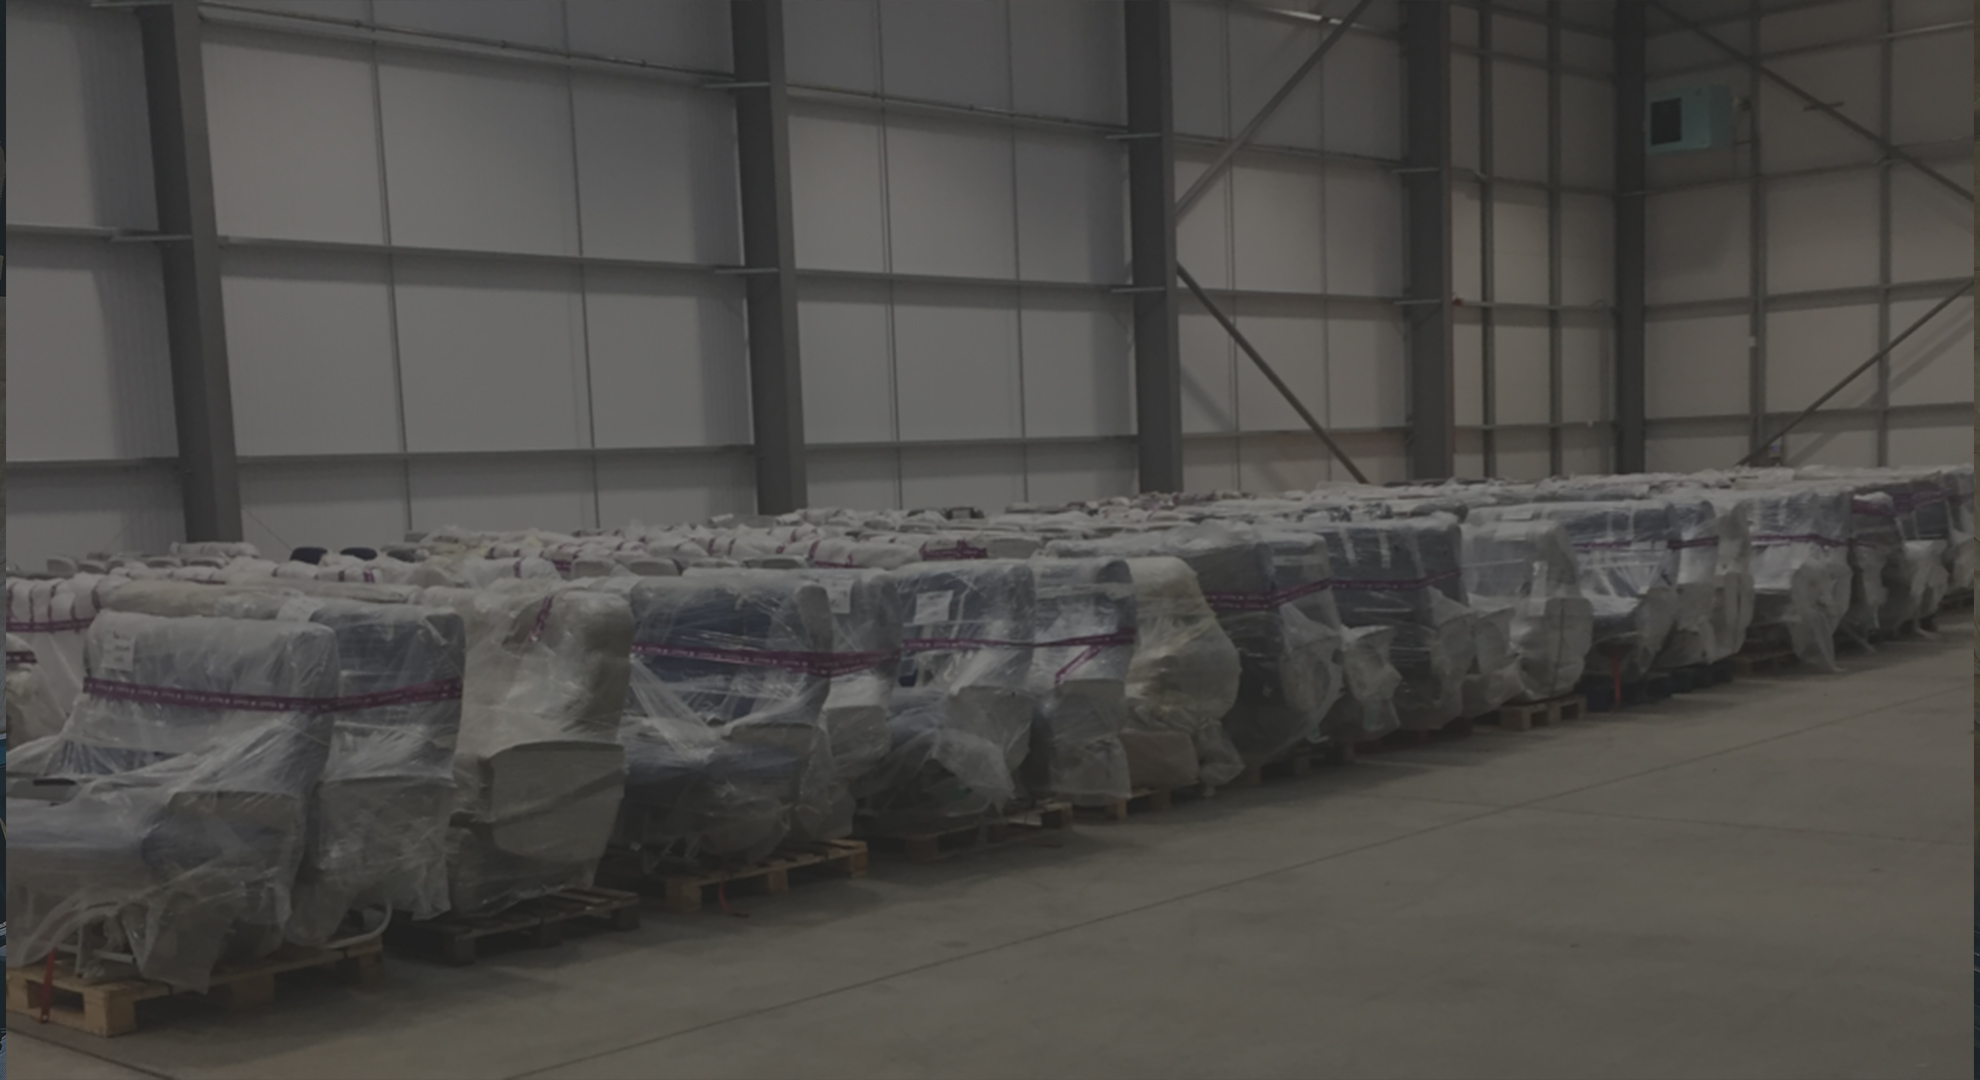 AIRA warehouse with packed aviation seats - parts storage facility